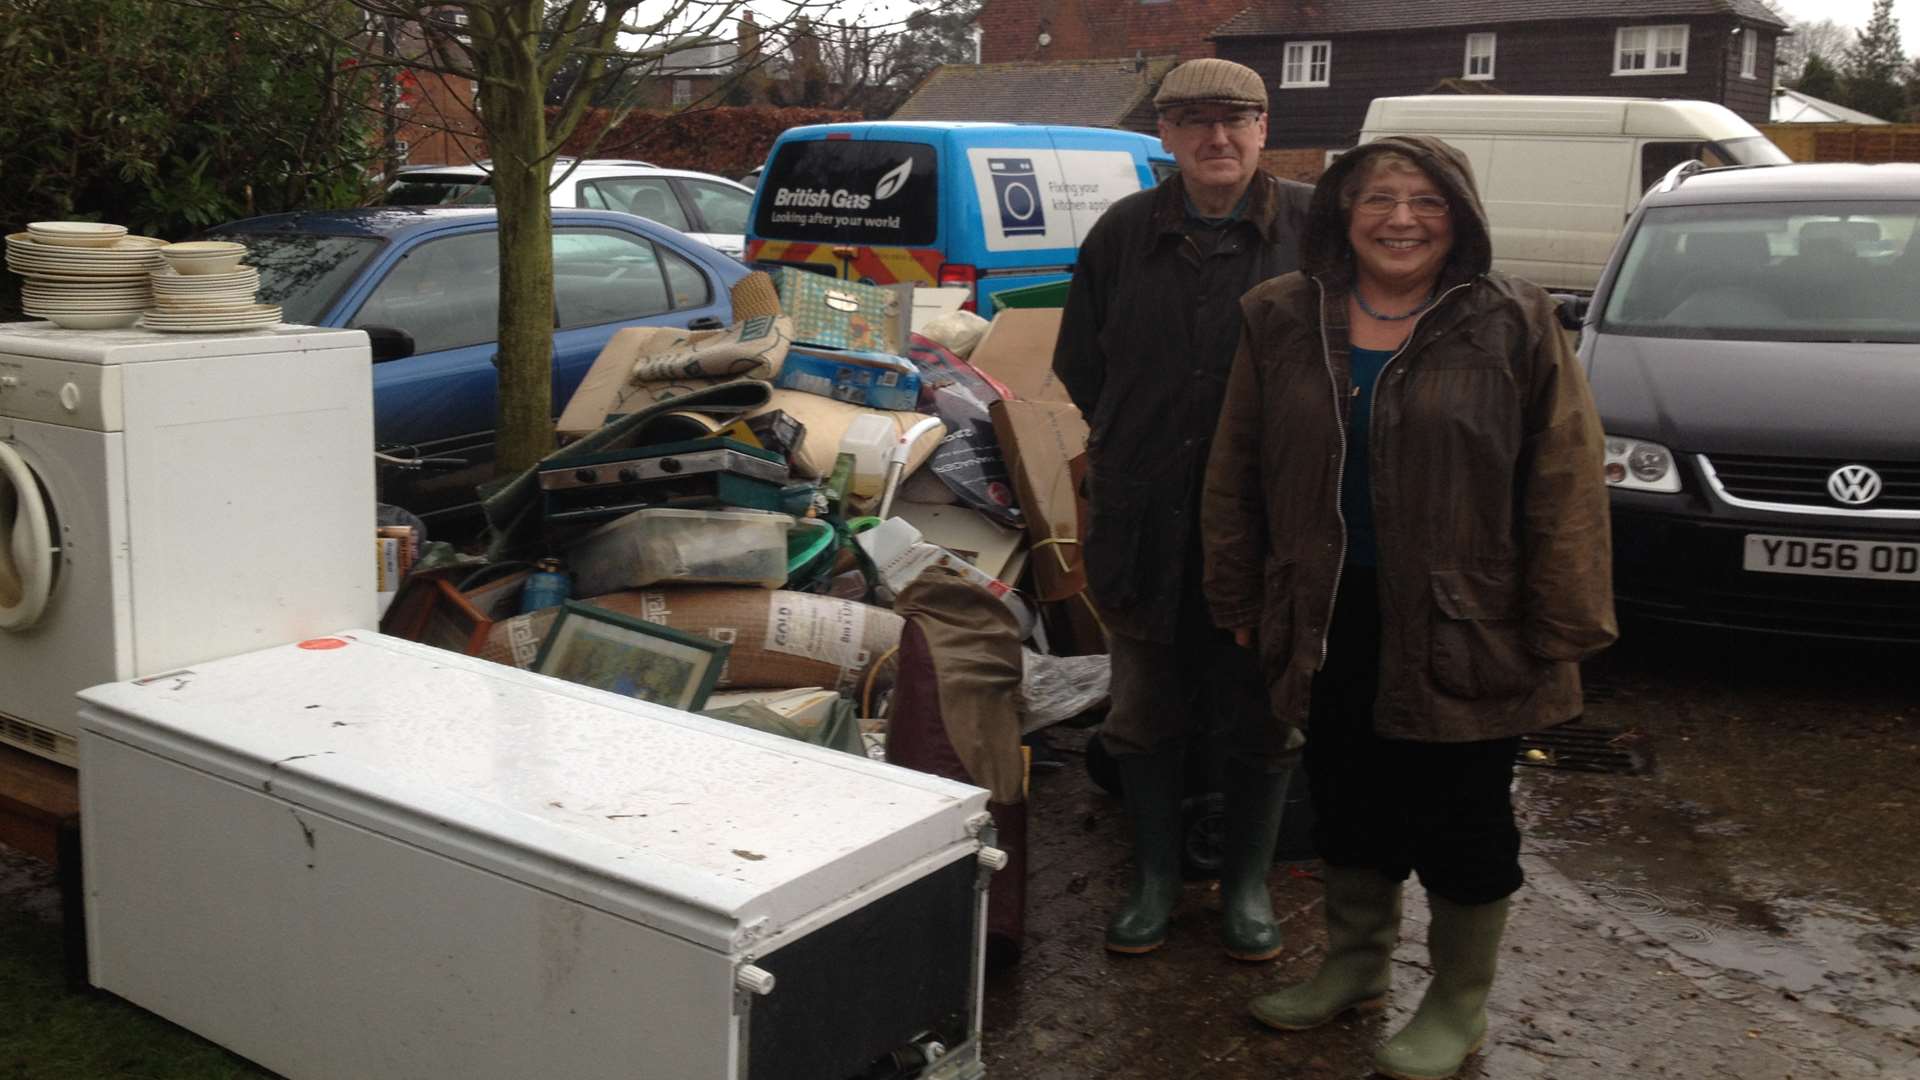 Major Timothy Oyler and wife Trish with their ruined possessions after the floods in Yalding